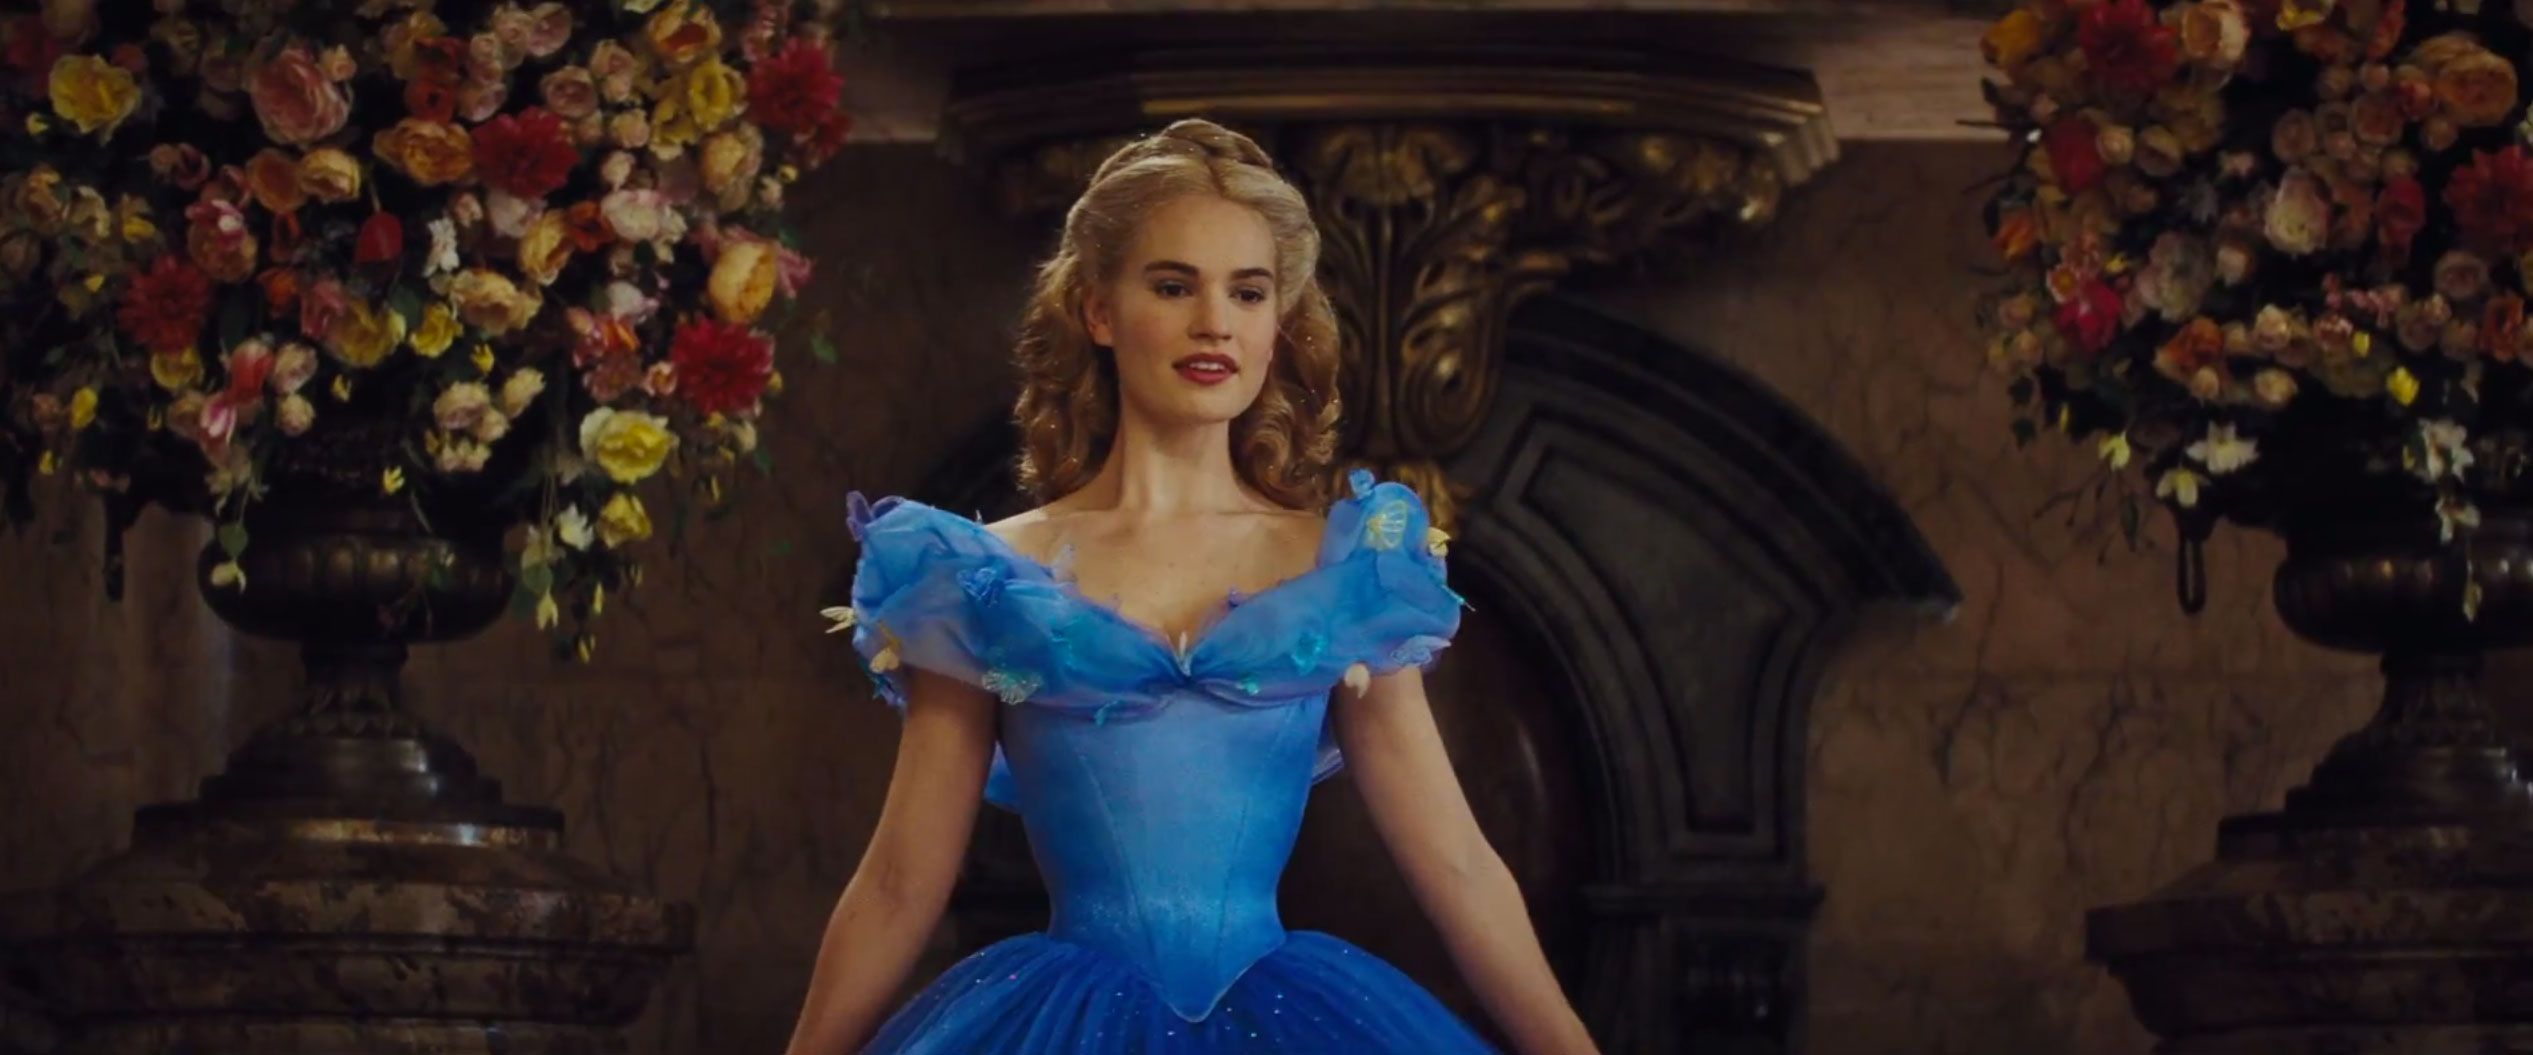 Buy > cinderella images blue dress > in stock